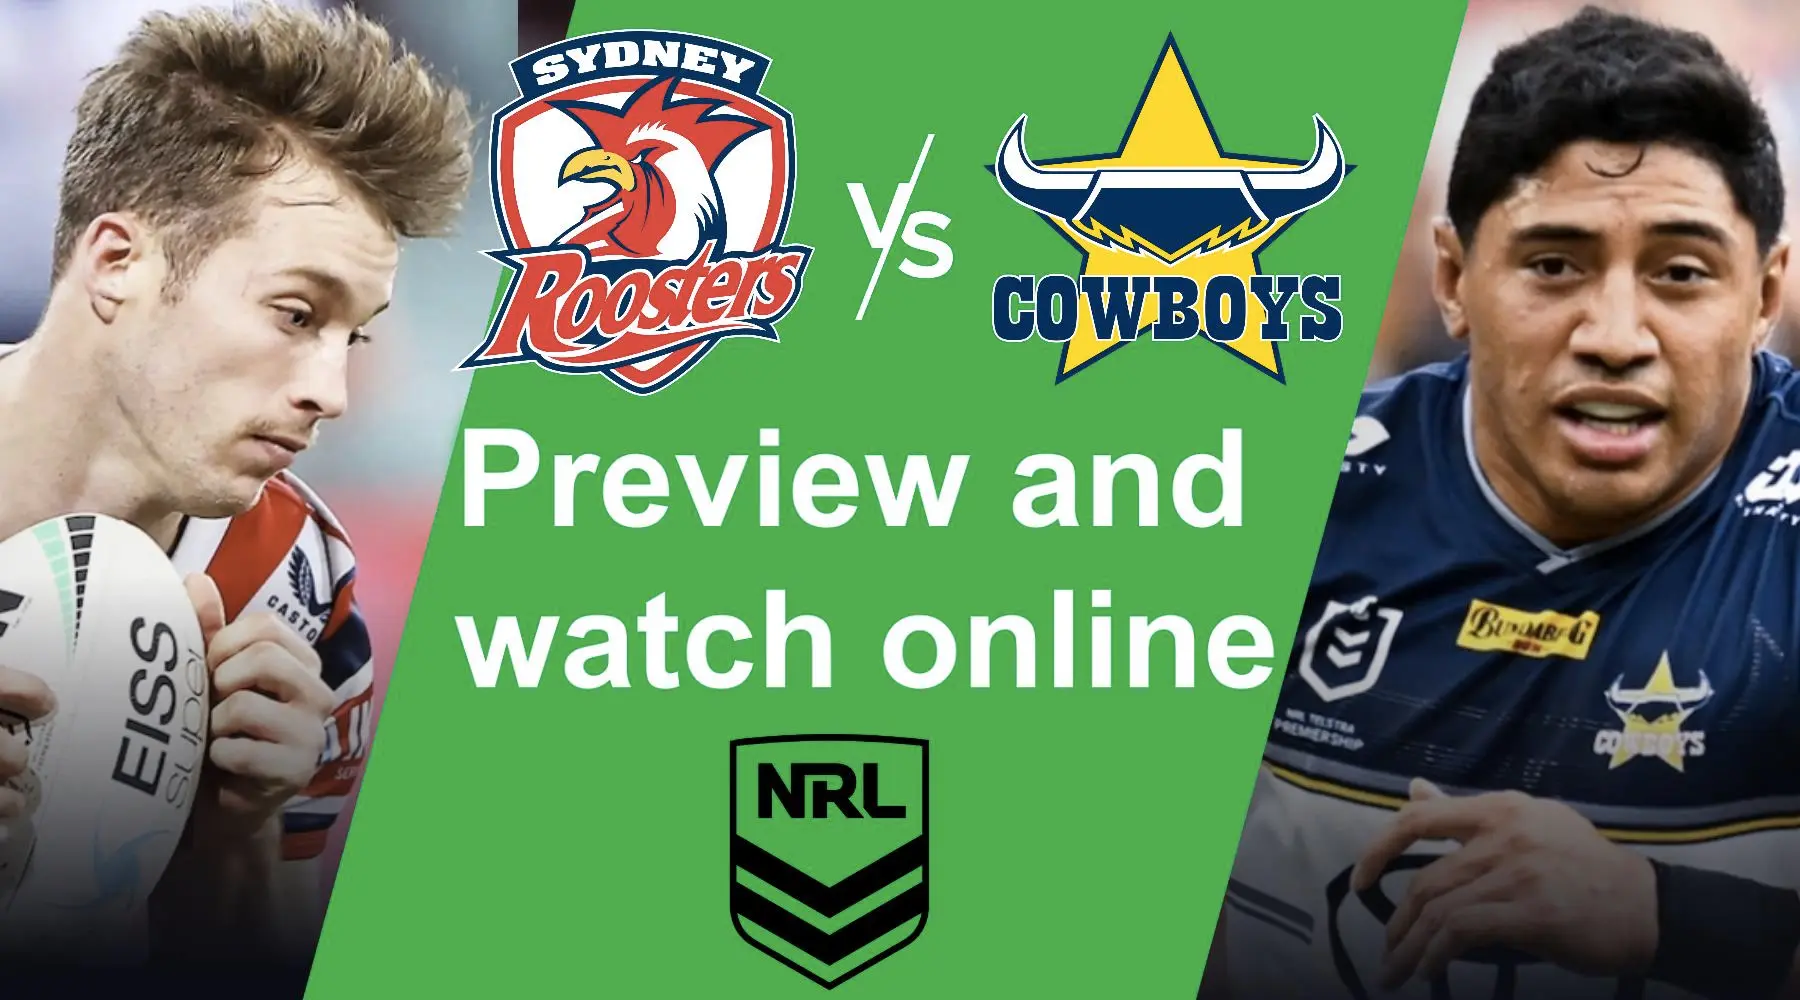 Roosters vs Cowboys How to watch NRL live and match preview